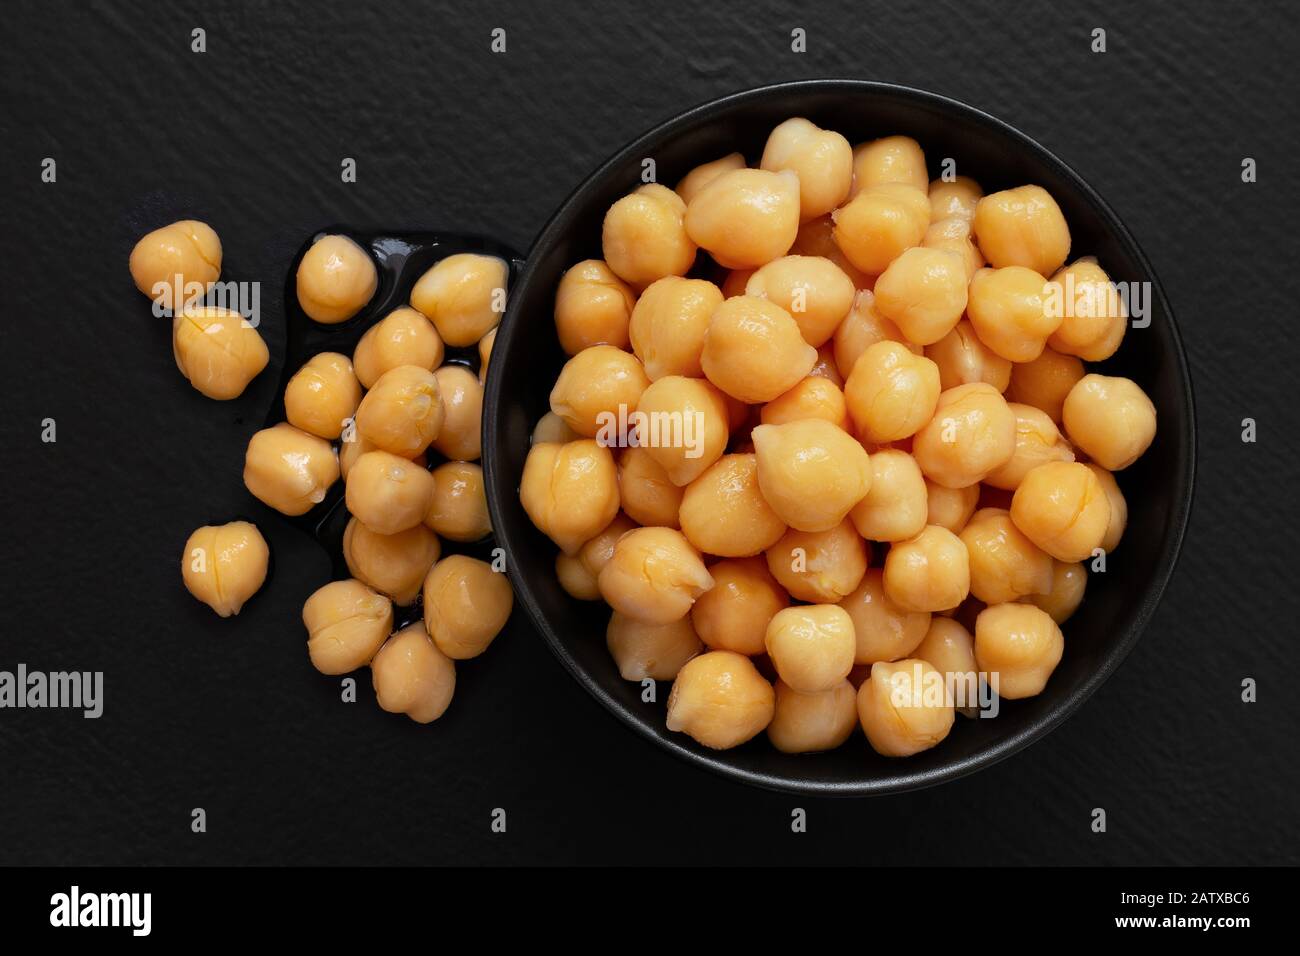 Cooked chick peas in a black ceramic bowl isolated on black painted wood. Spilled chick peas. Top view. Stock Photo